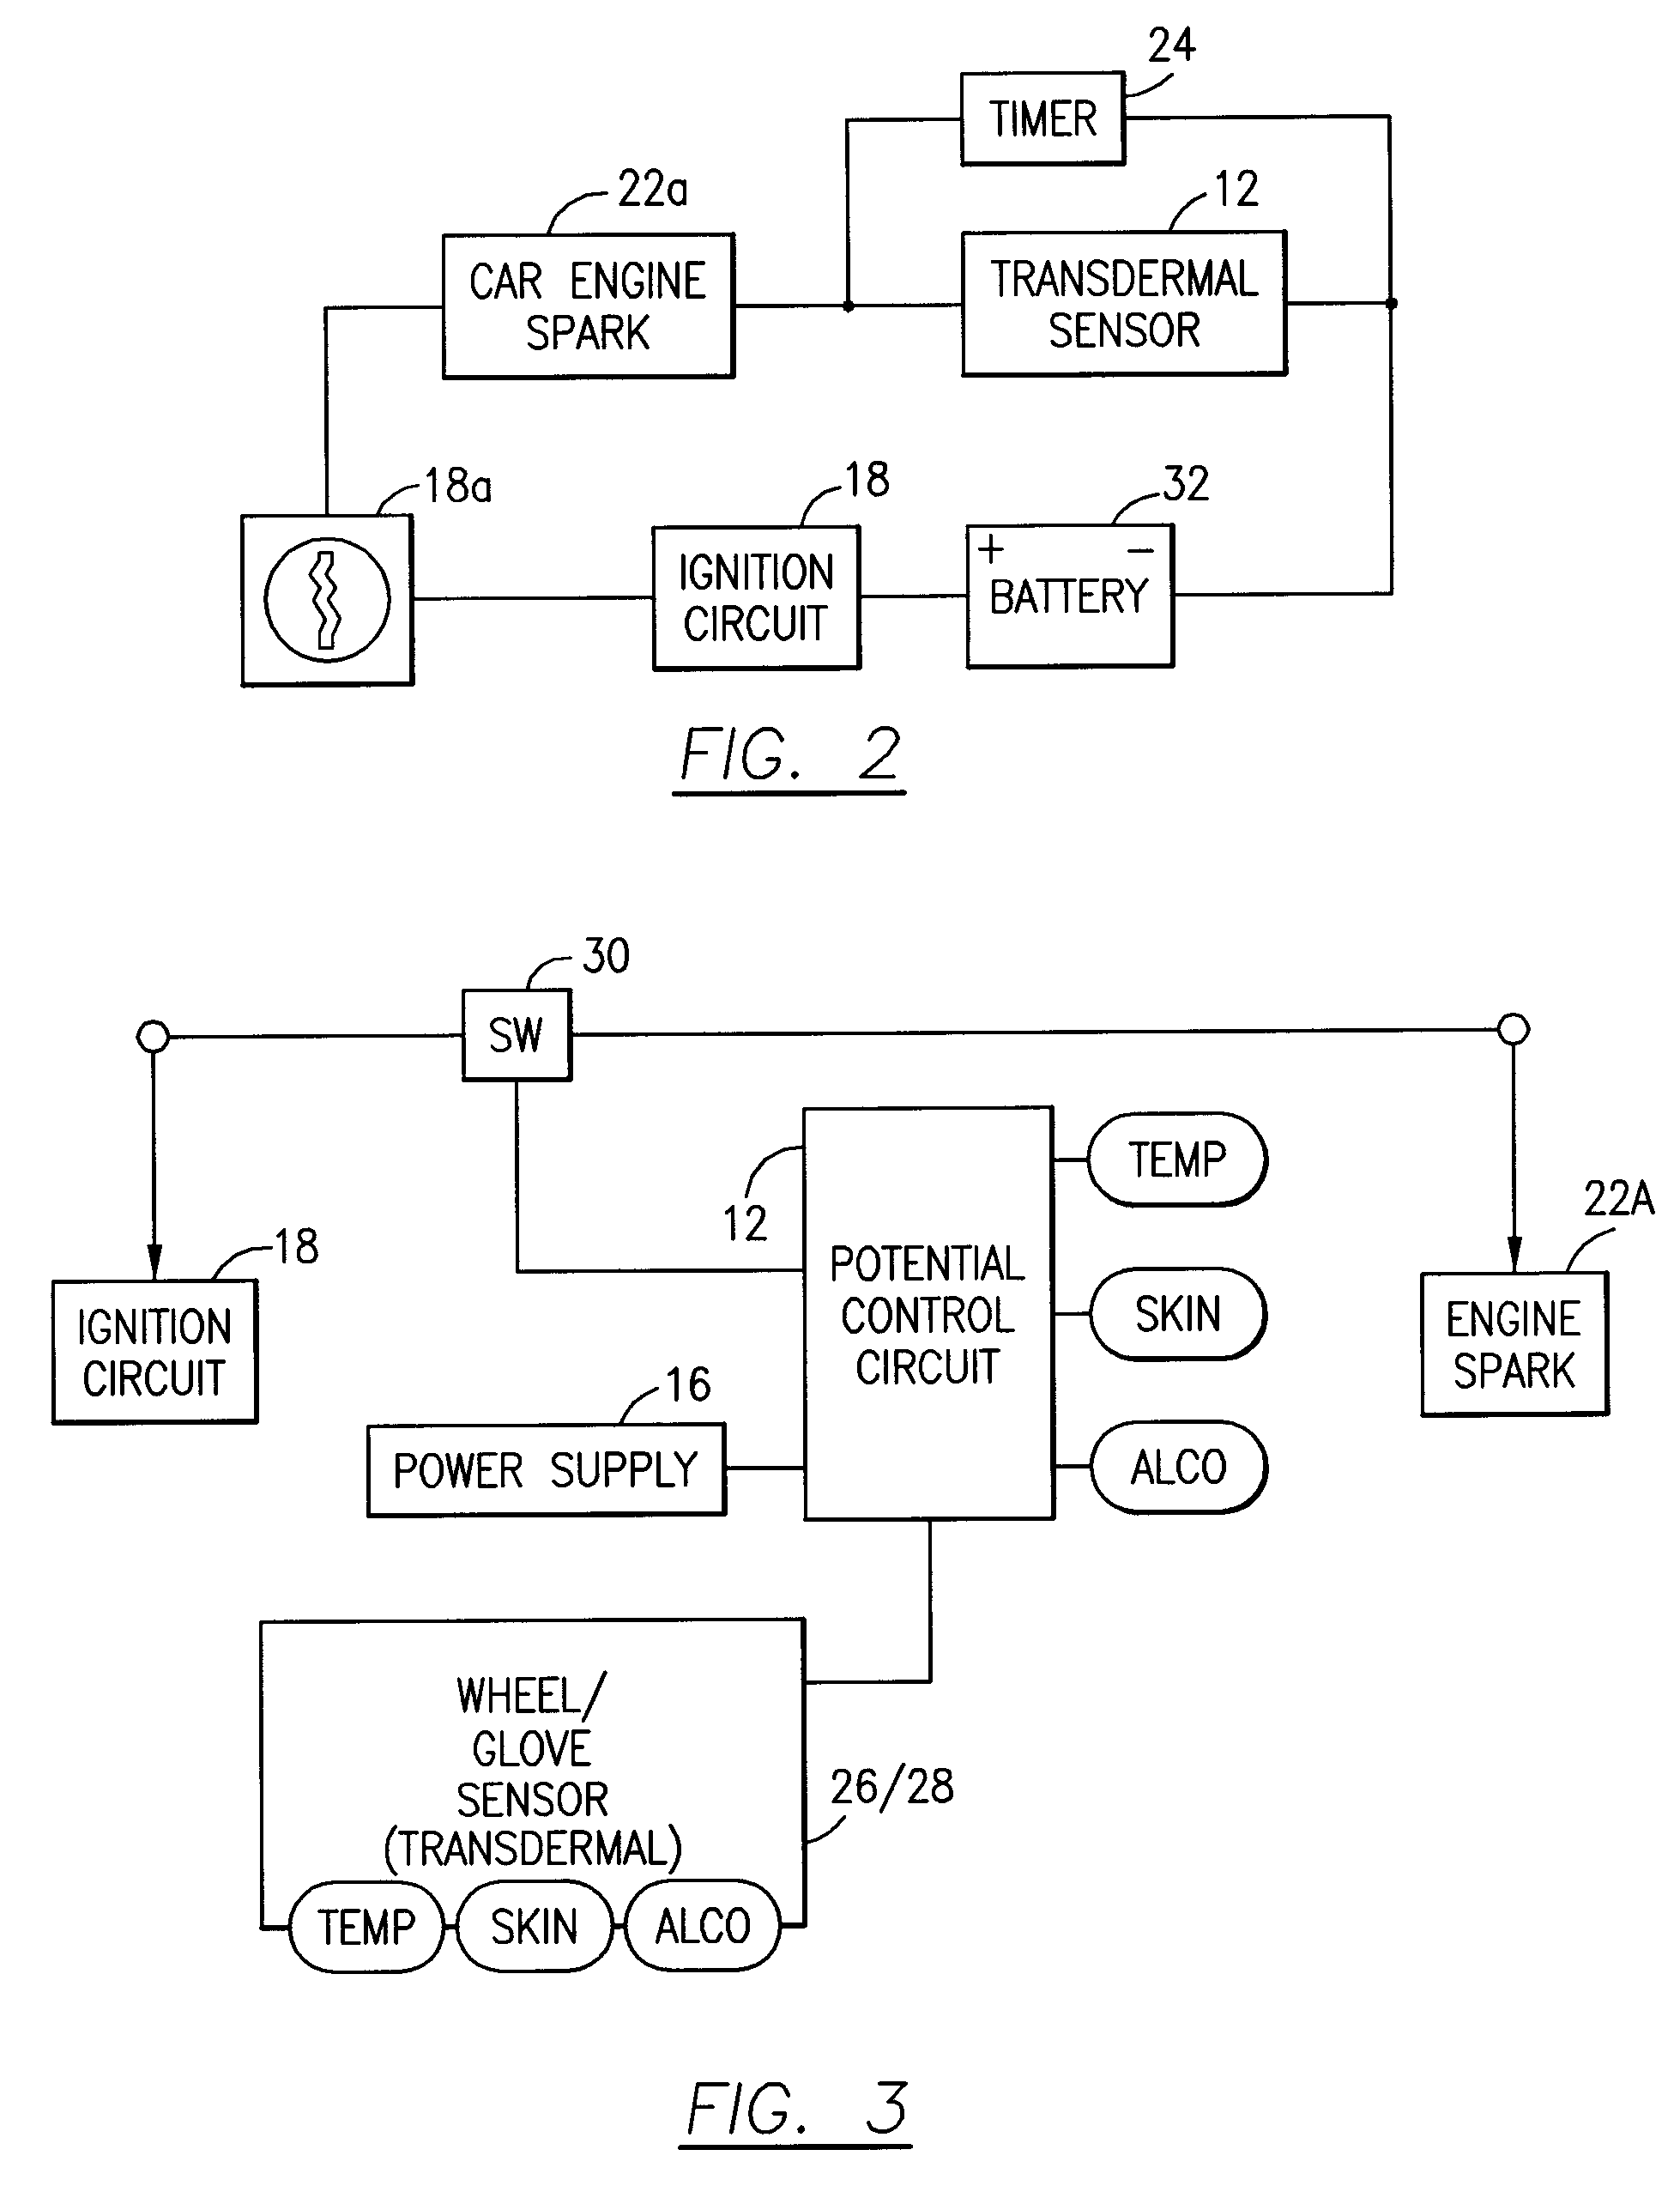 System and method for preventing the operation of a motor vehicle by a person who is intoxicated